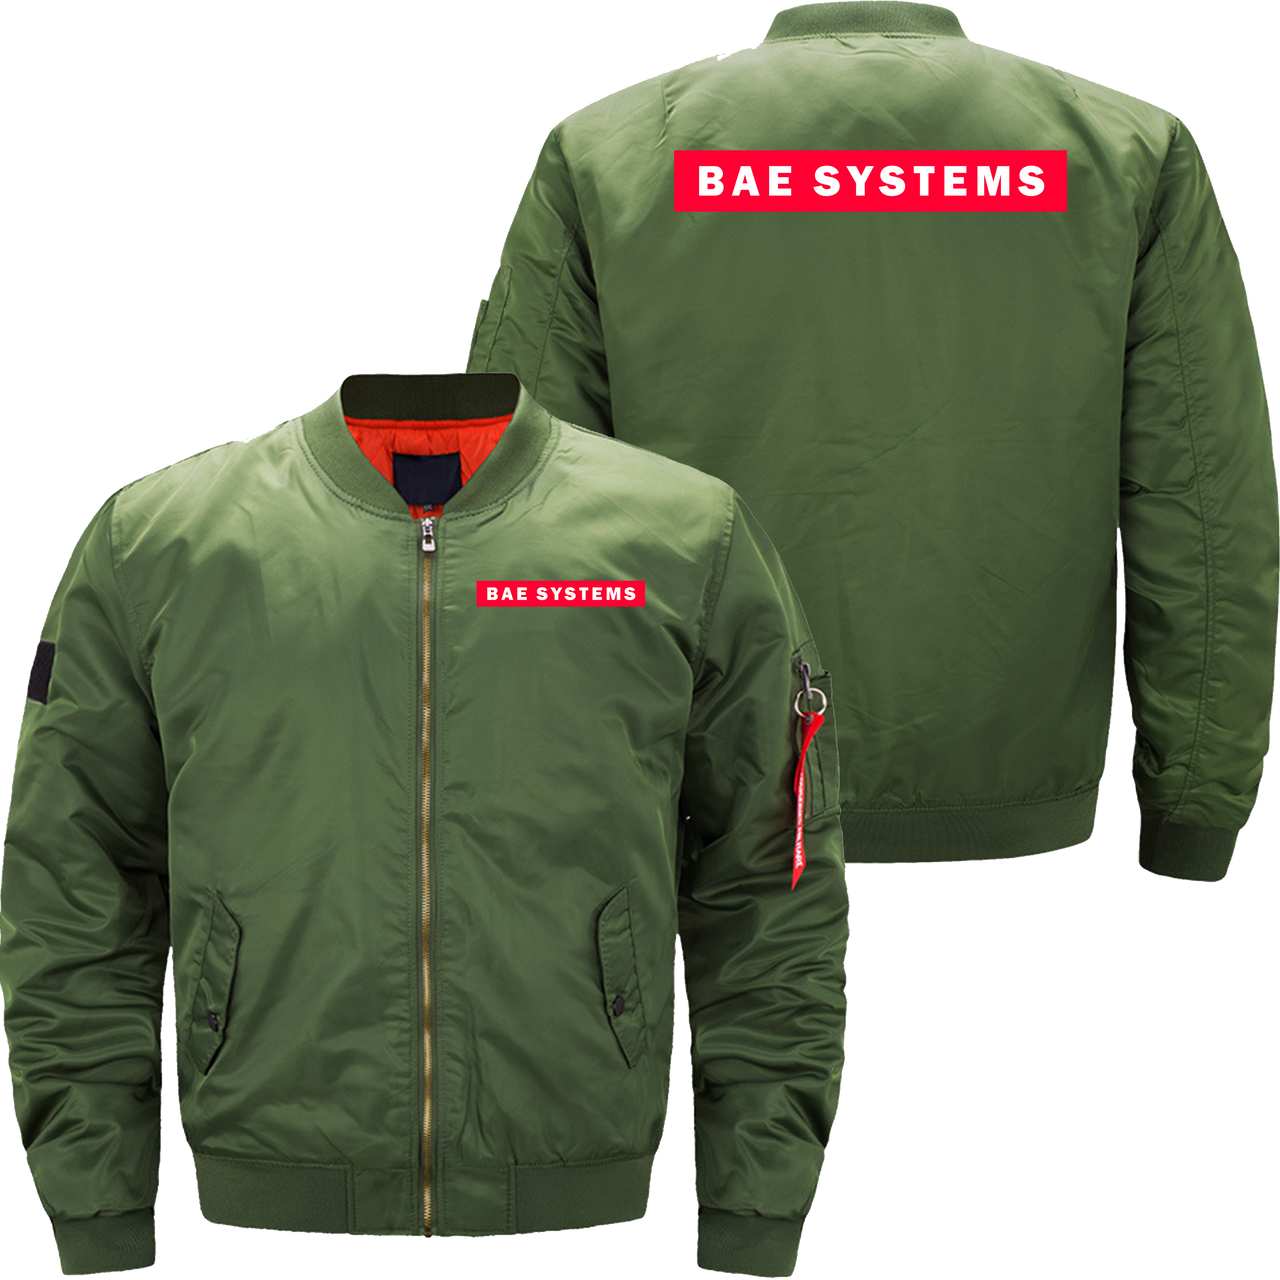 Bae systems Jacket